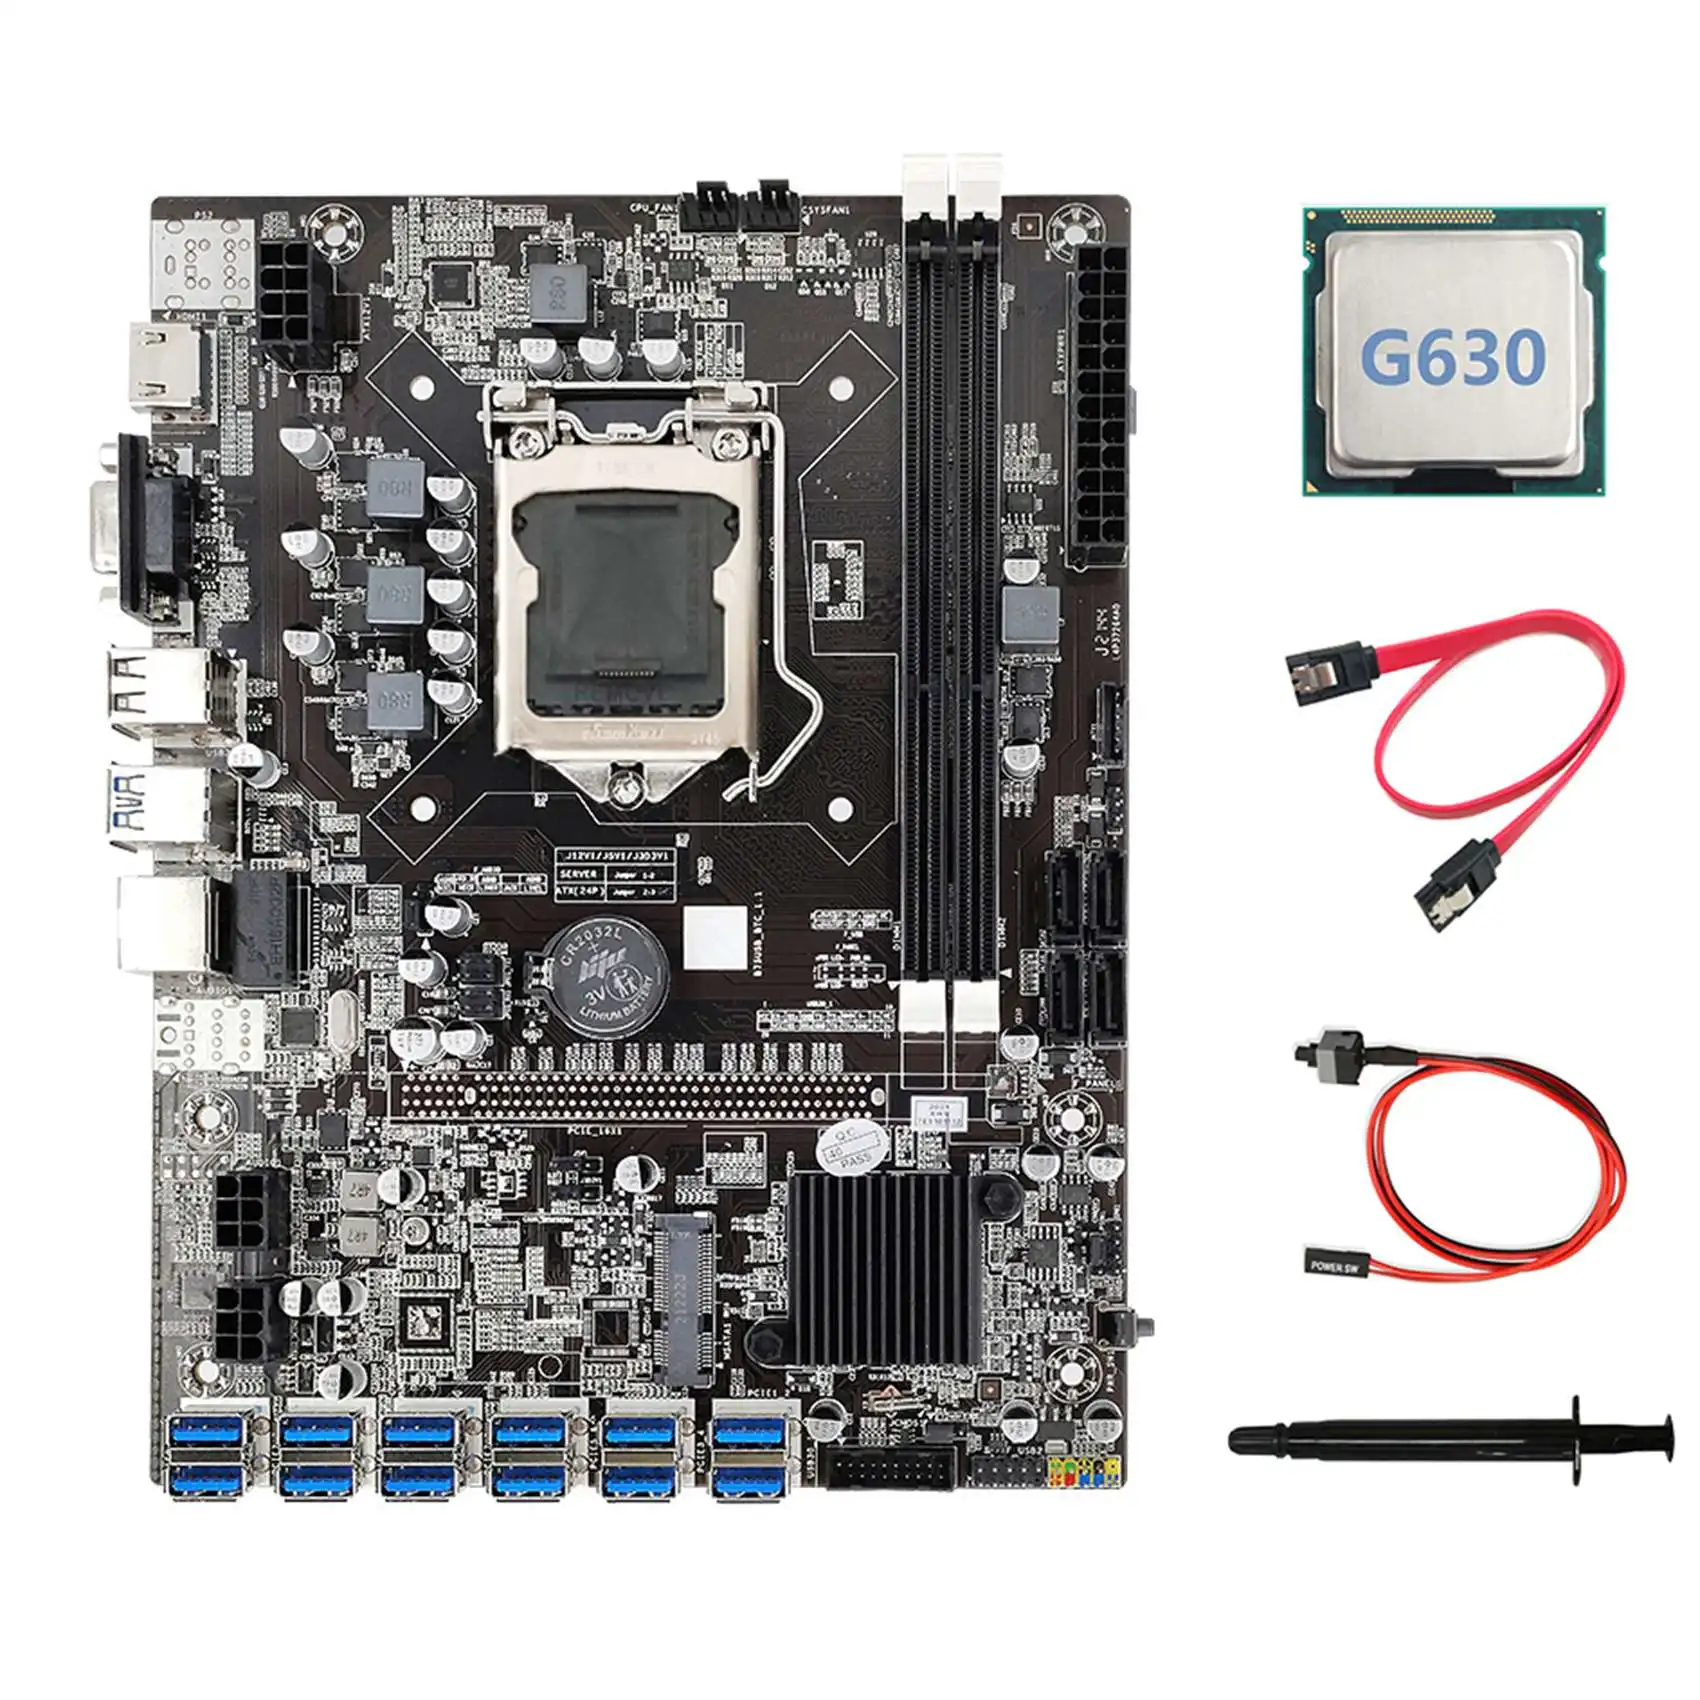 

B75 ETH Miner Motherboard 12 PCIE to USB3.0+G630 CPU+Thermal Grease+SATA Cable+Switch Cable DDR3 LGA1155 Motherboard